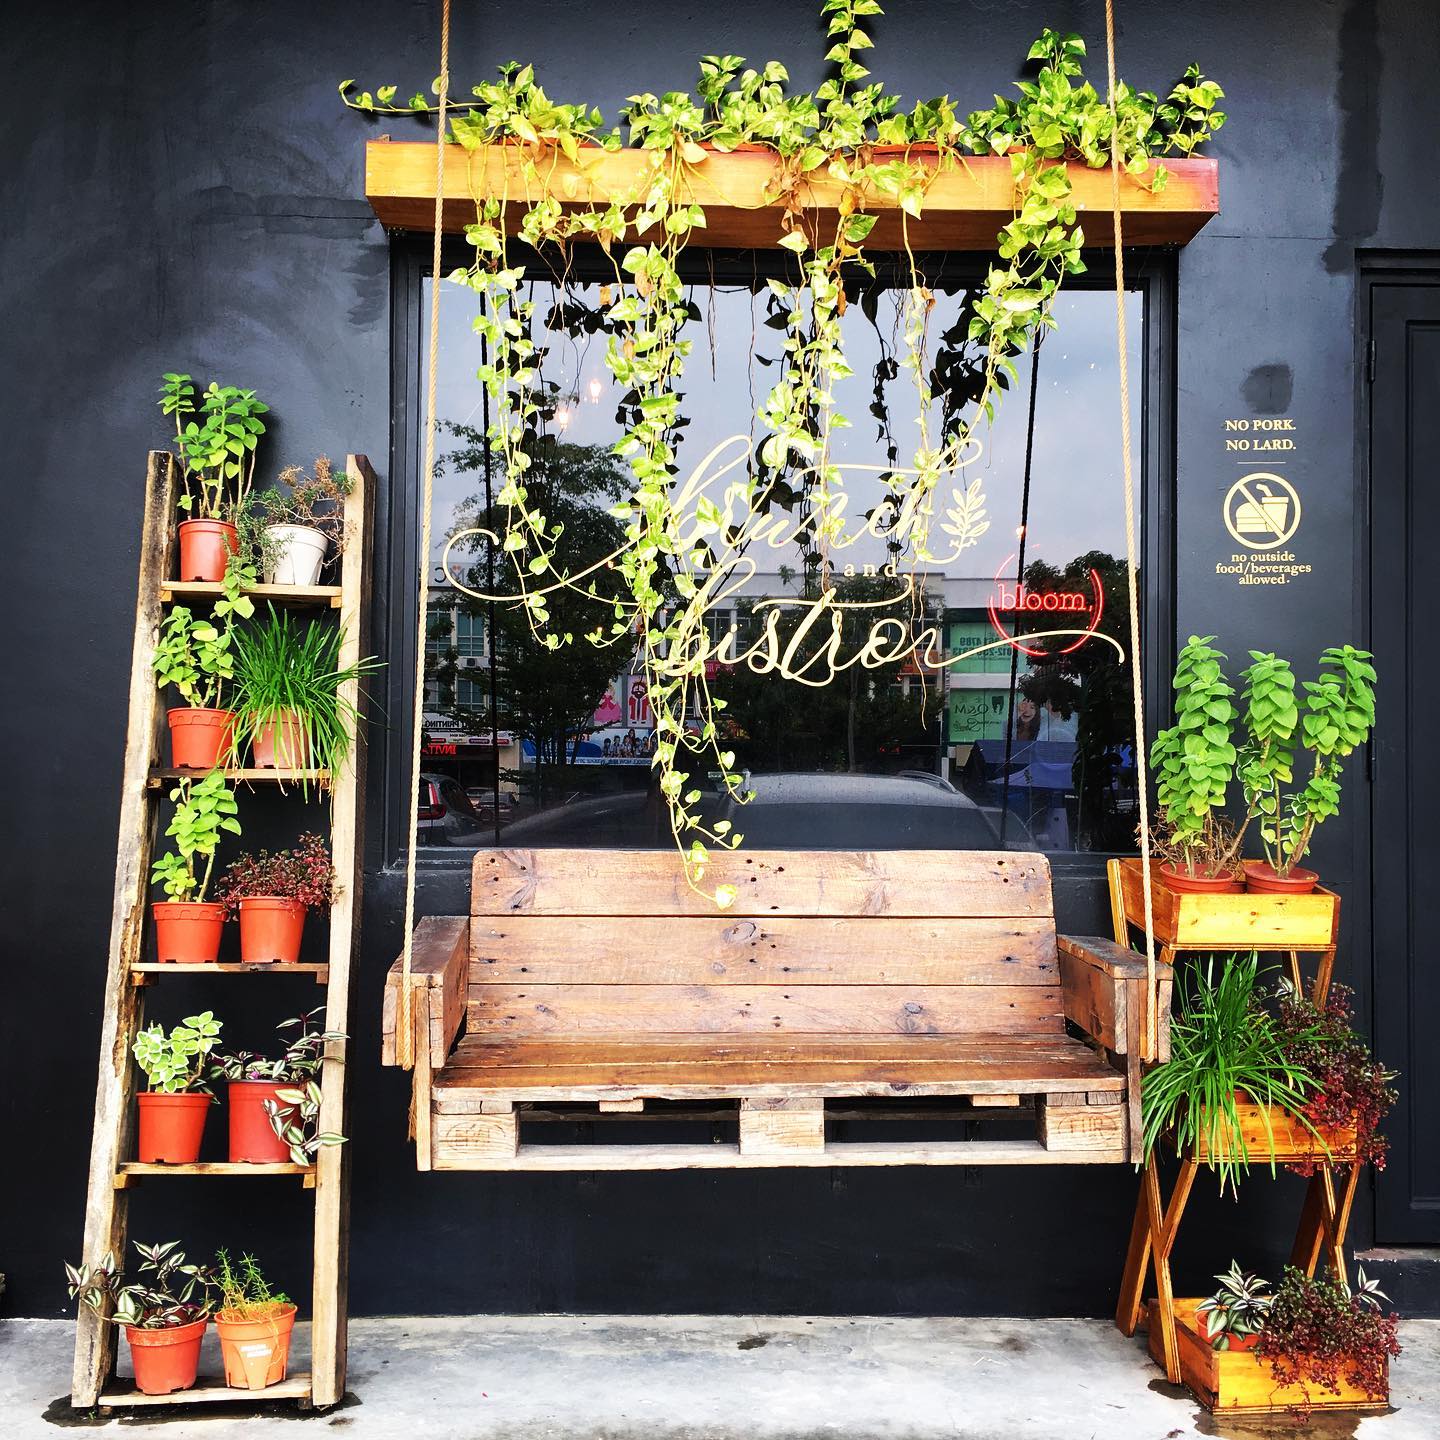 Nature-themed cafes near JB checkpoint - bloom by mok mok swing